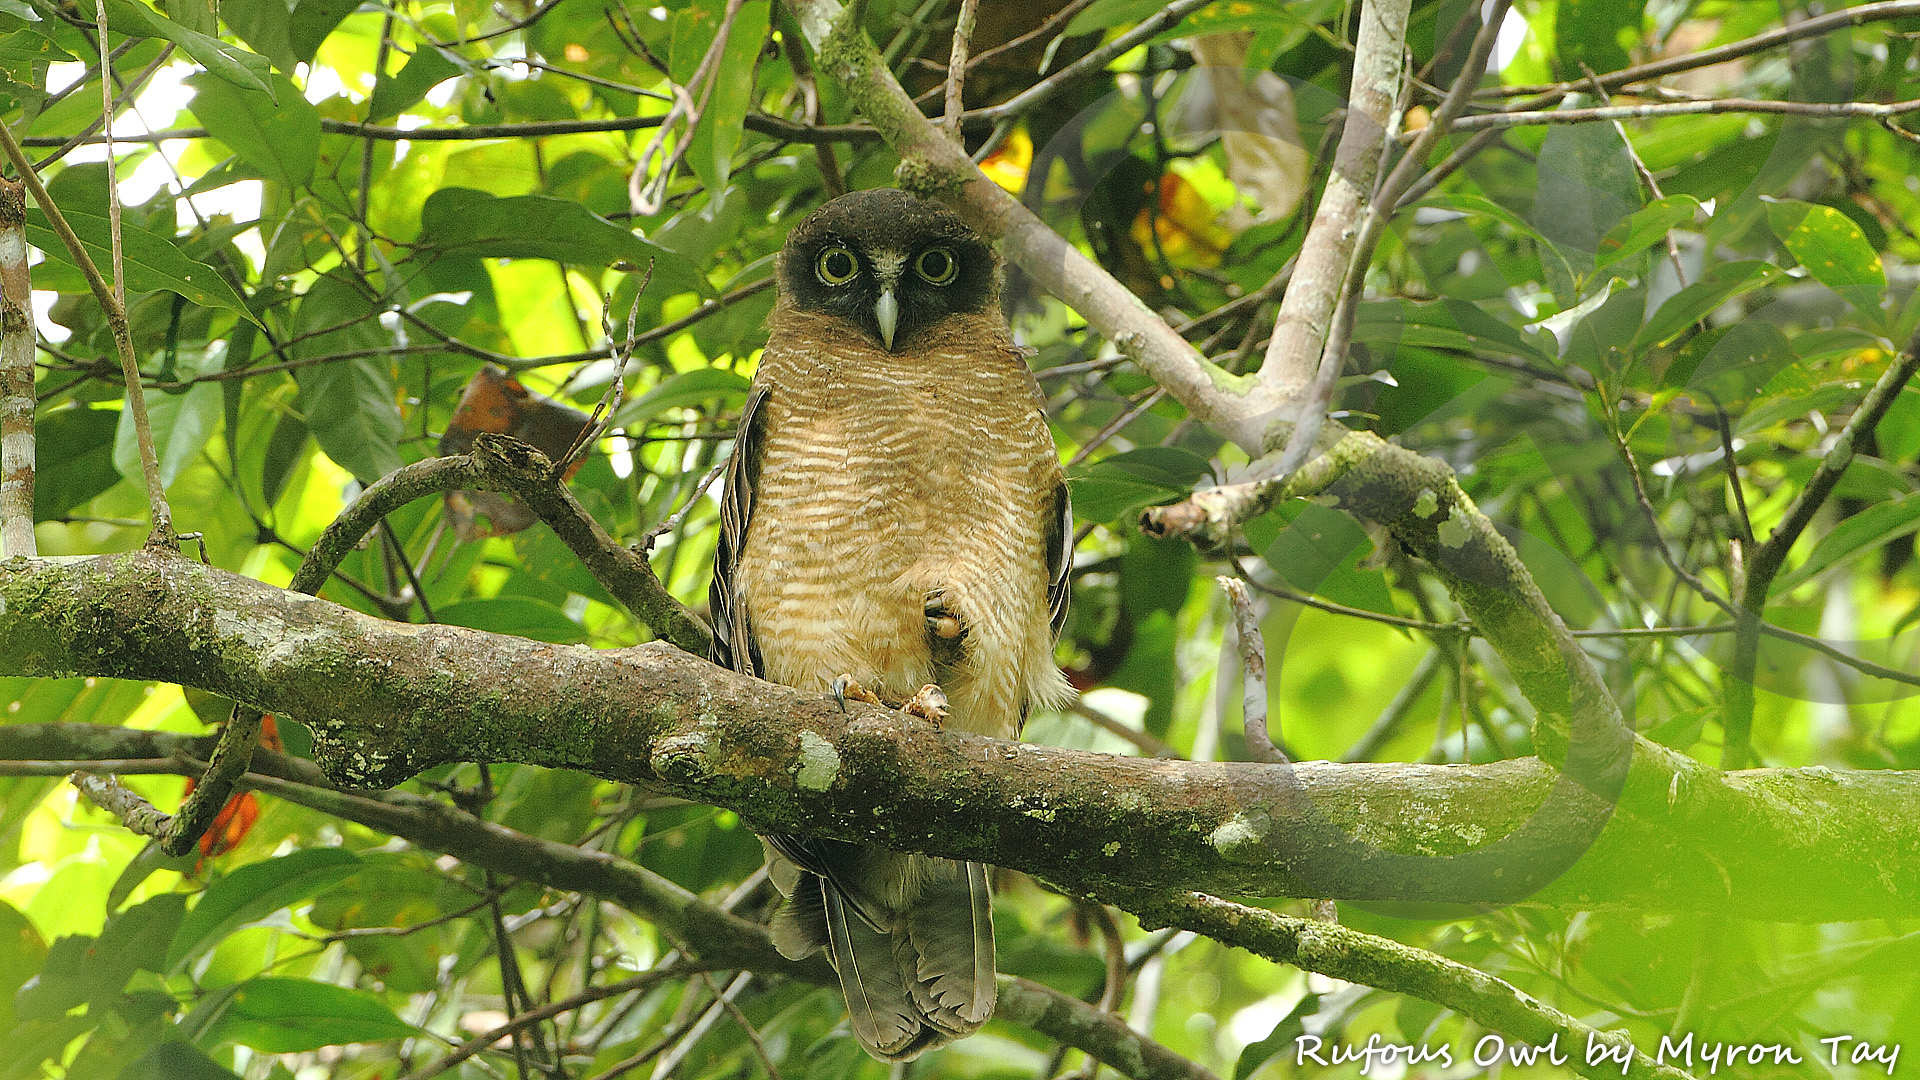 New Guinea's biggest yet most difficult owl to find, the Rufous Owl Ninox rufa, could be one of the highlights around our secluded Muaib jungle camp near Sentani. Copyright © Myron Tay